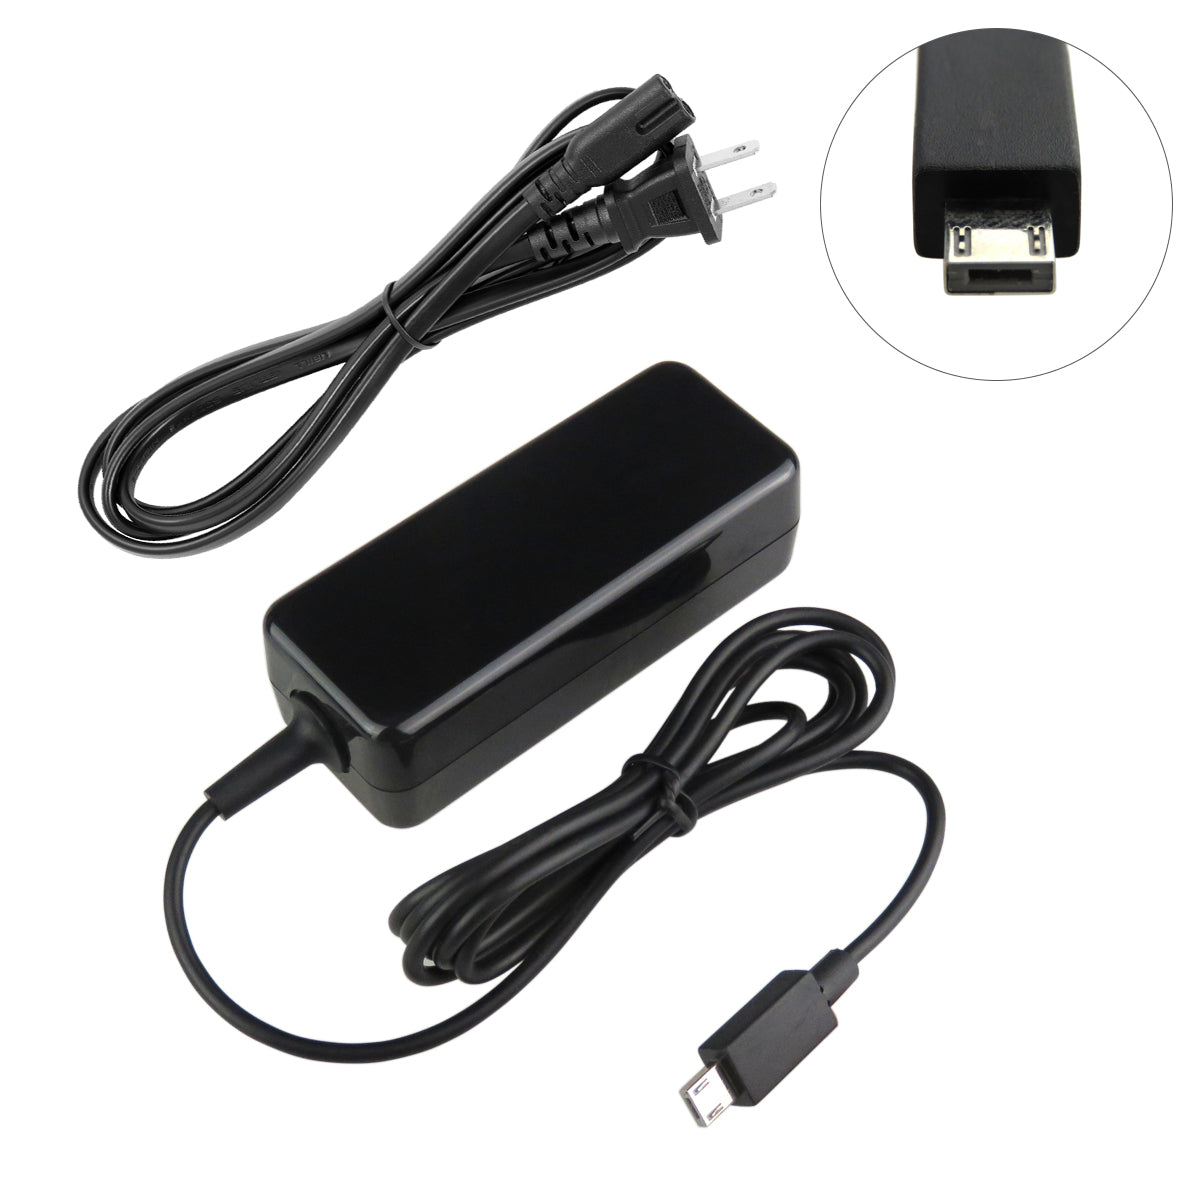 Charger for ASUS EeeBook X205TA-UH01-BK Laptop.